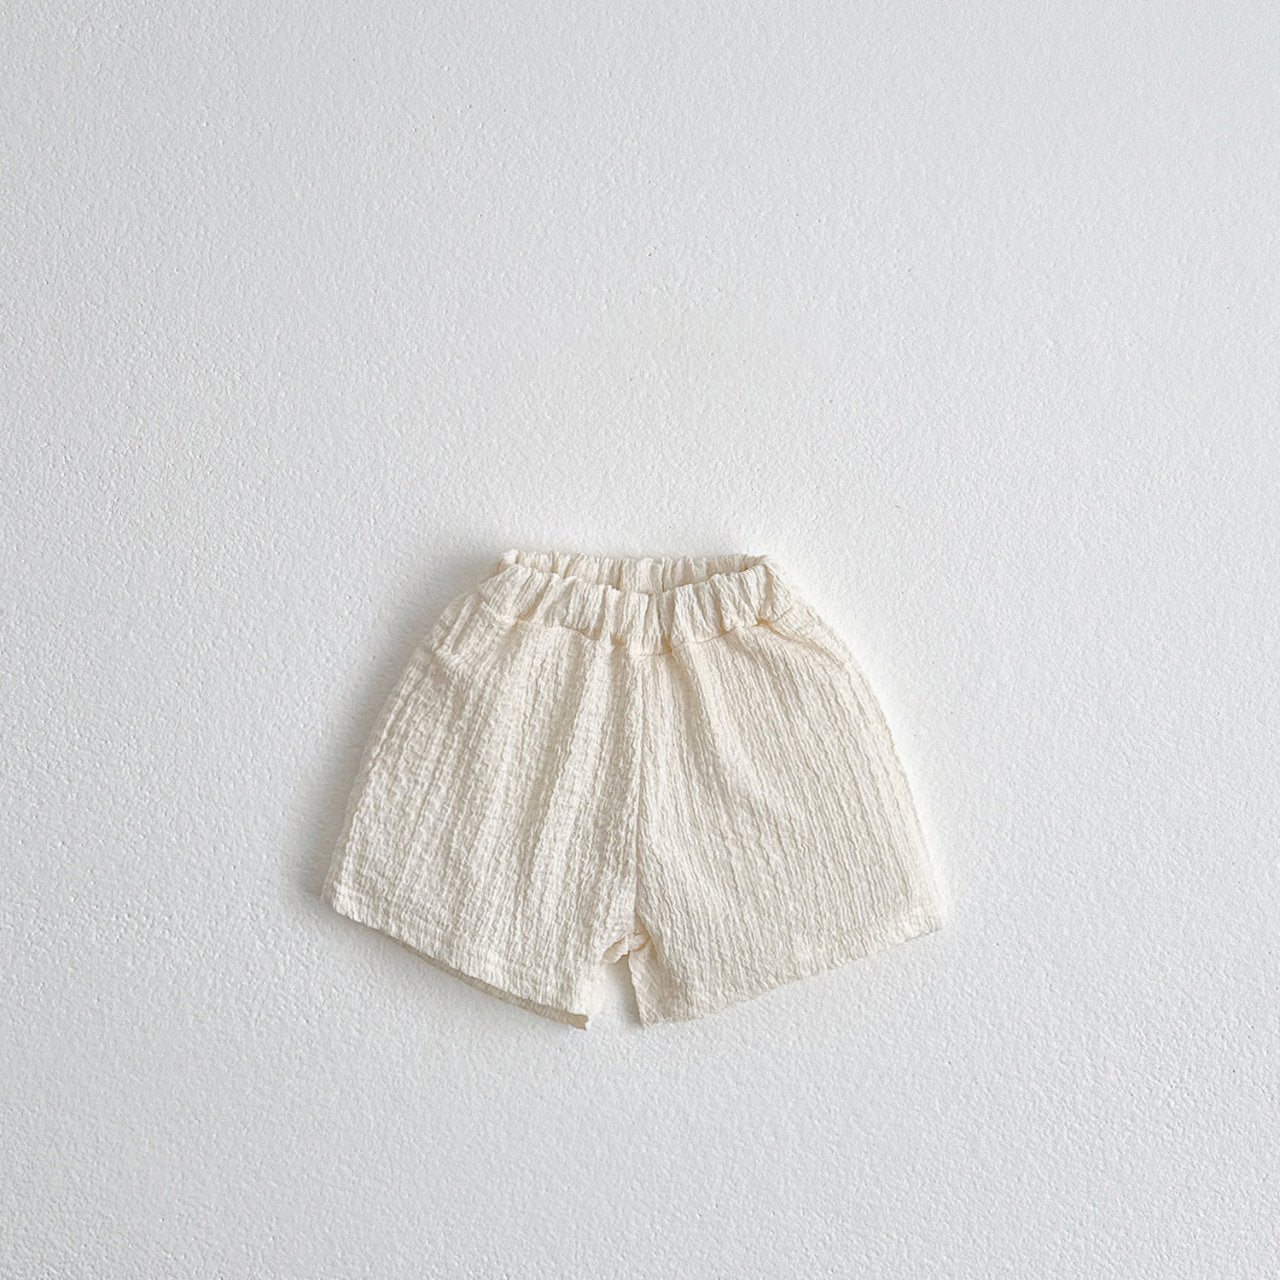 Toddler Textured Basic Shorts (1-6y) - 4 Colors